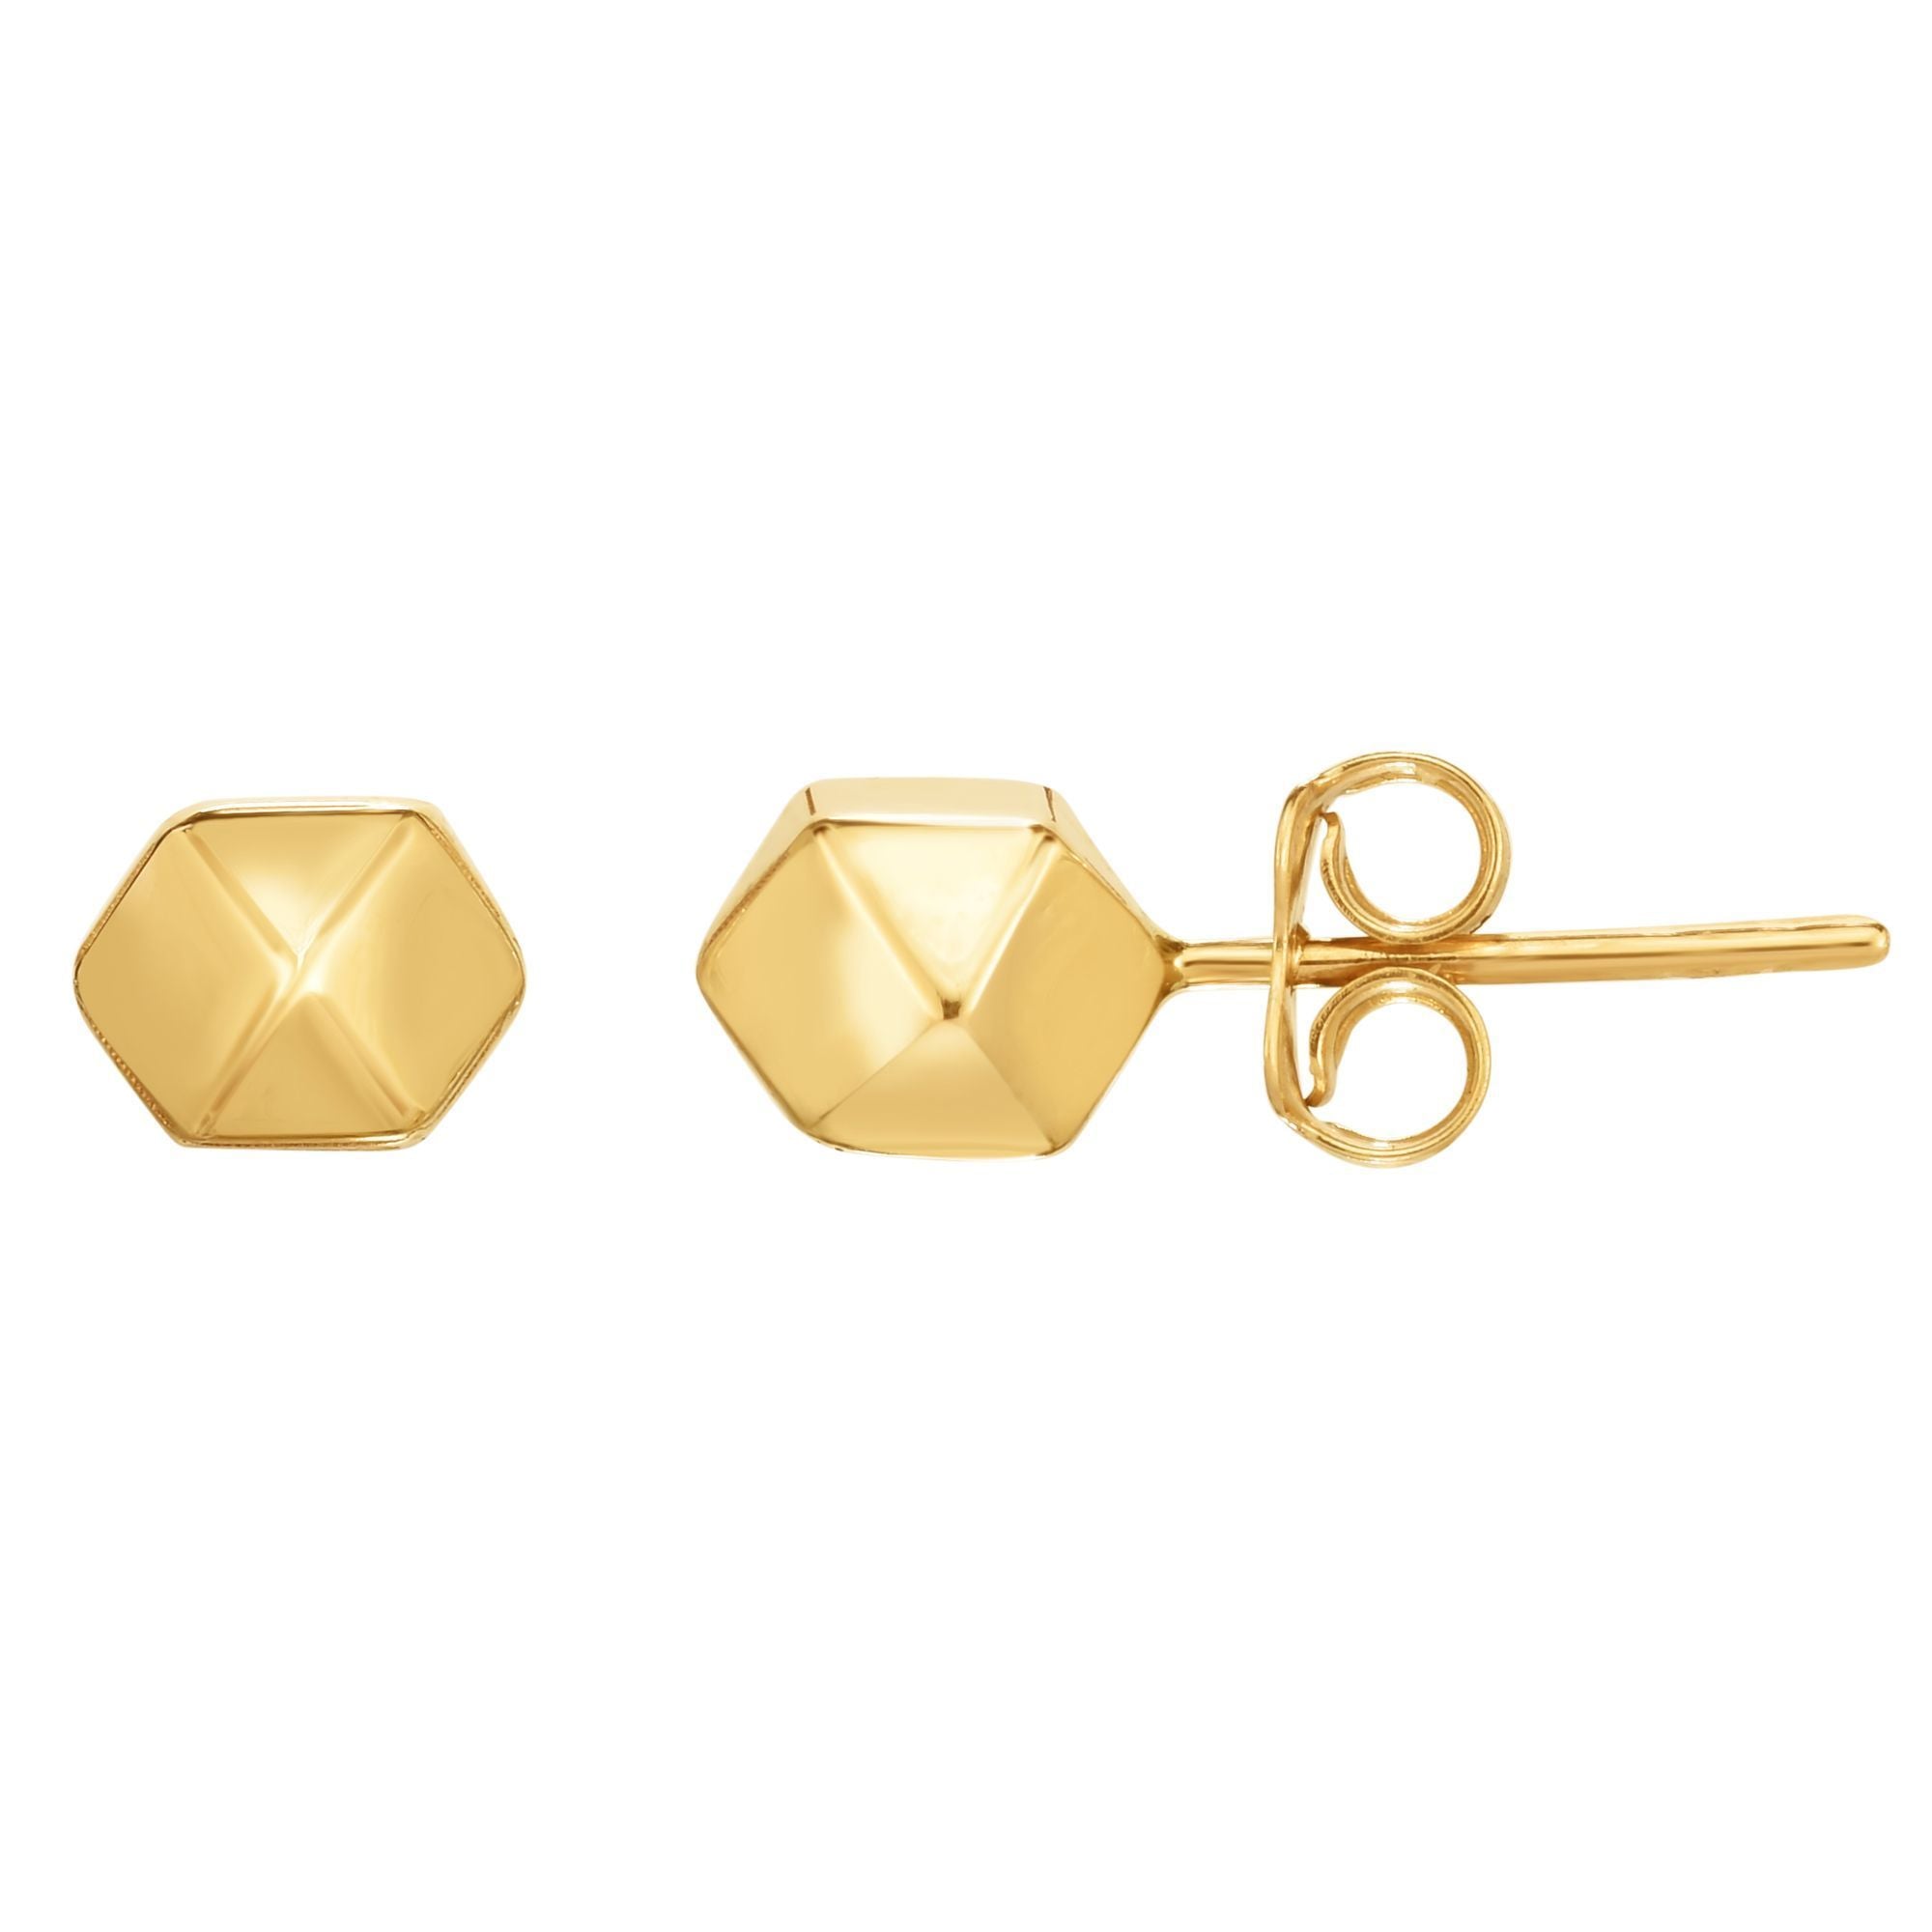 Minimalist Solid Gold Shiny Post Pyramid Stud Earrings with Push Back Clasp - wingroupjewelry